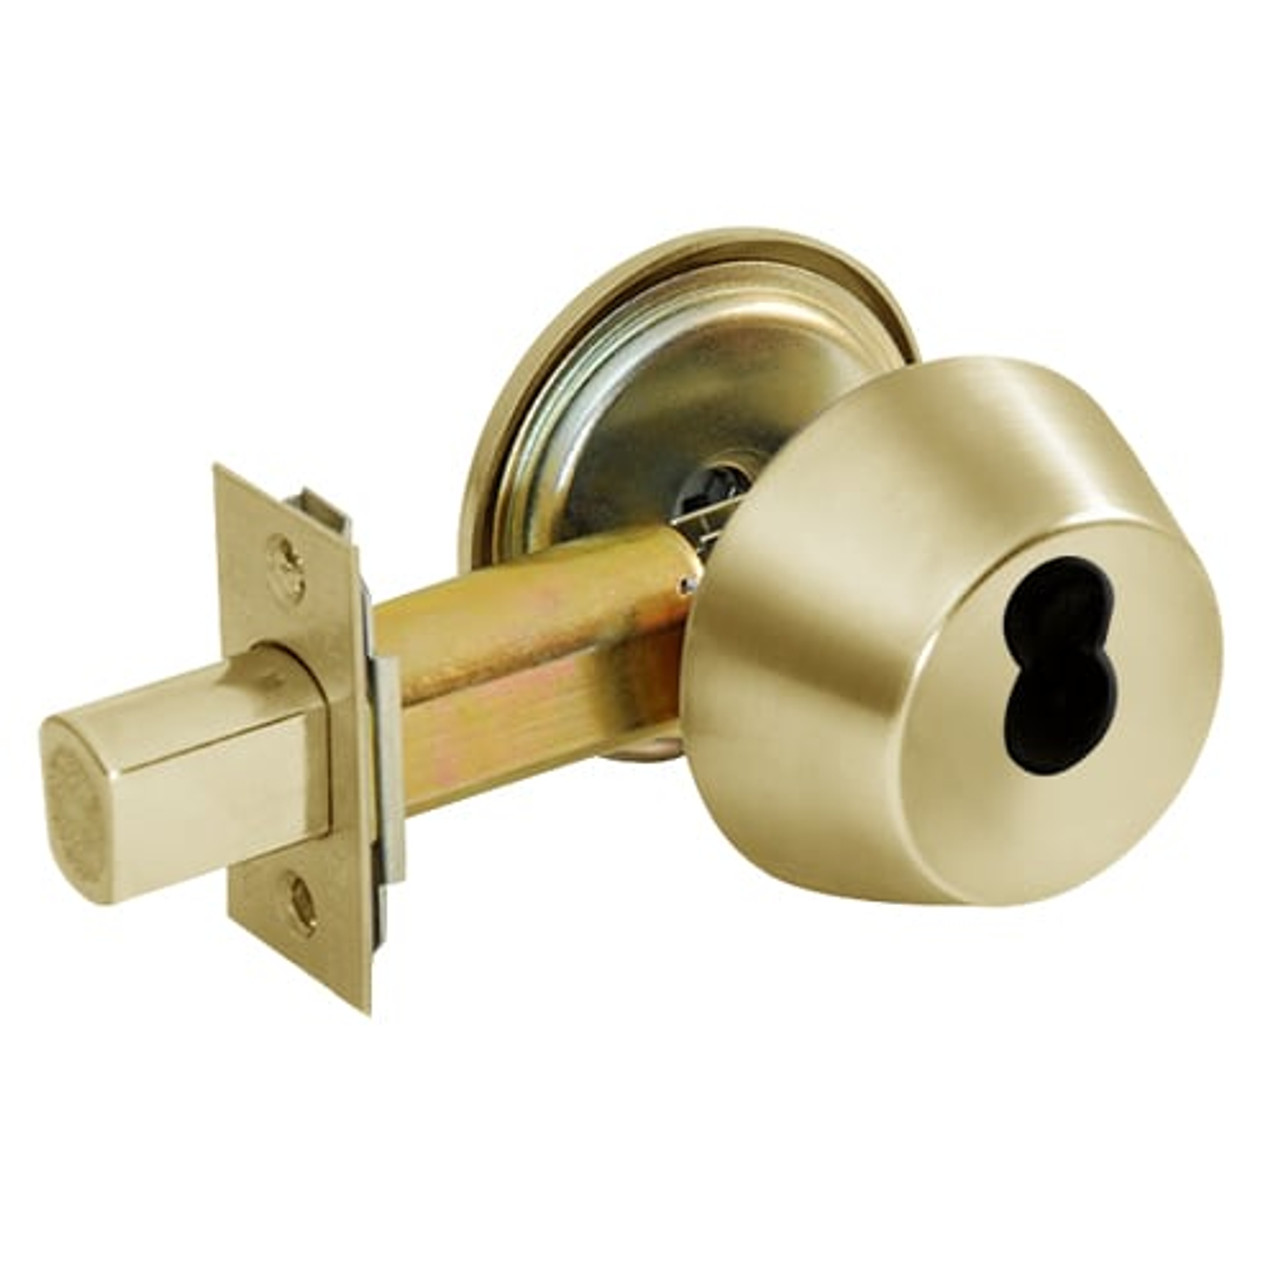 DL3217-606-CL6 Corbin DL3200 Series Classroom Cylindrical Deadlocks with Single Cylinder in Satin Brass Finish